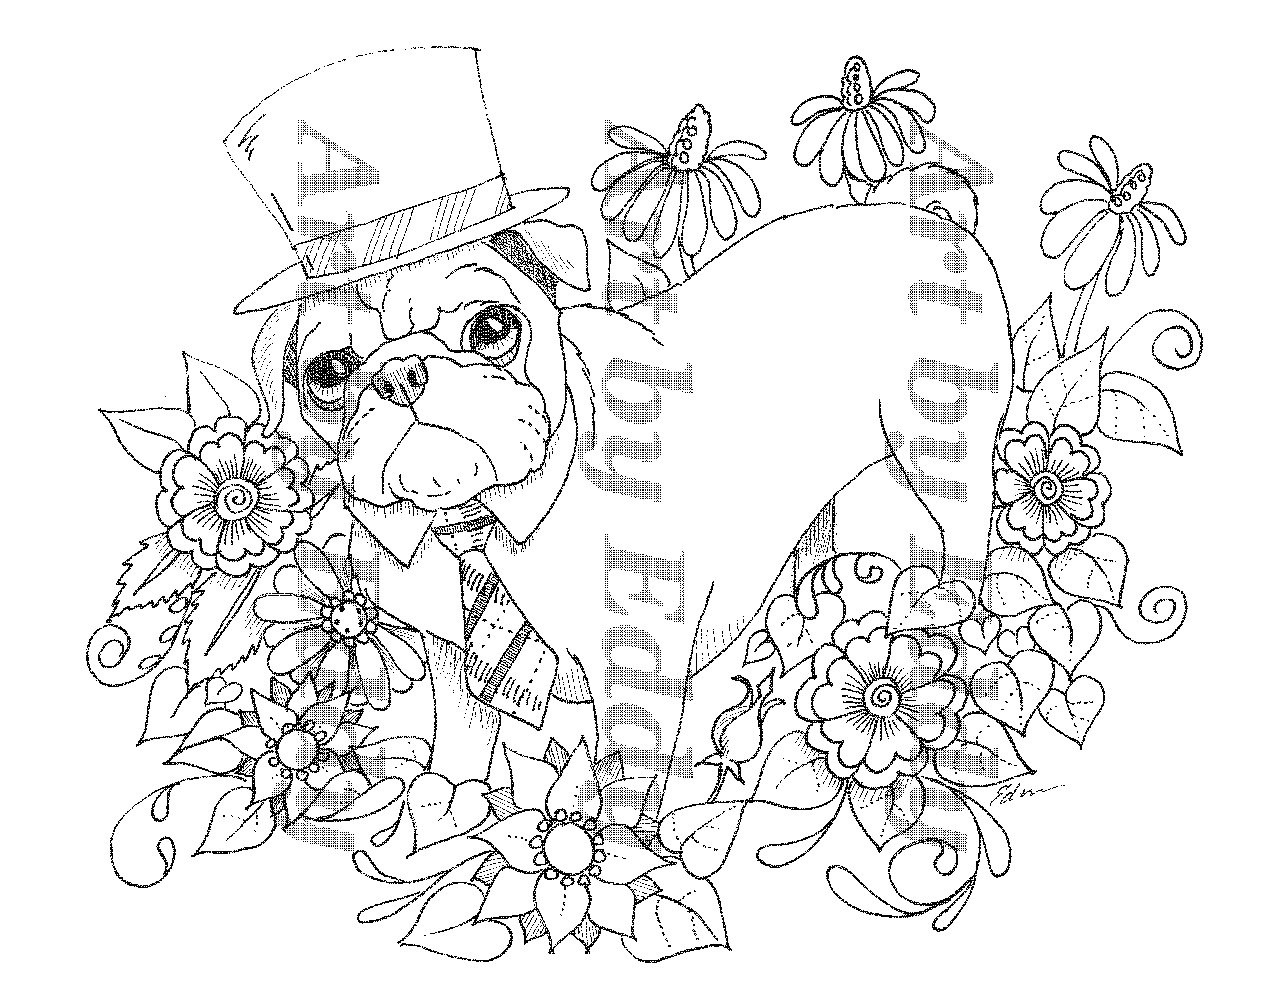 Coloring Pages Of Handsome Bad Boys
 Art of Pug Single Coloring Page Handsome Boy